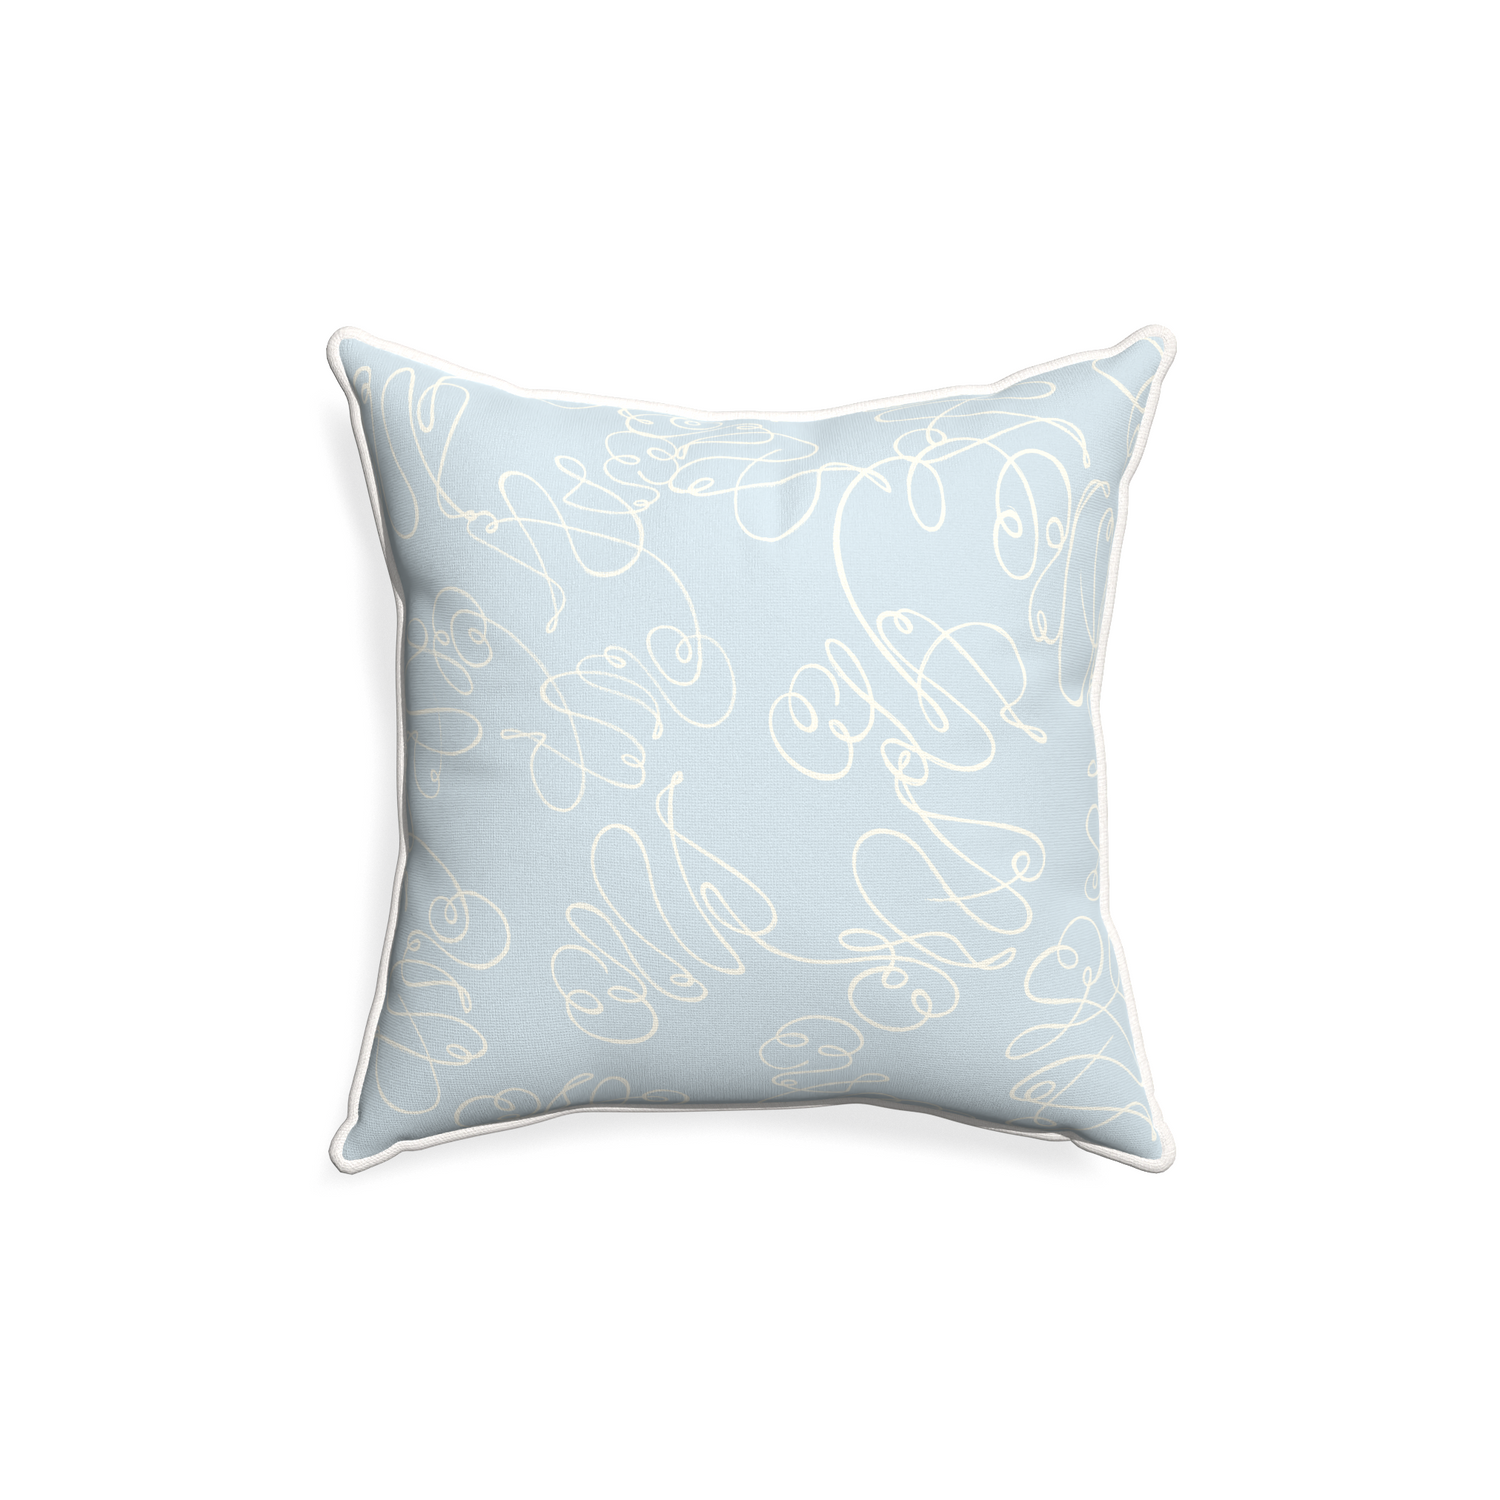 18-square mirabella custom powder blue abstractpillow with snow piping on white background